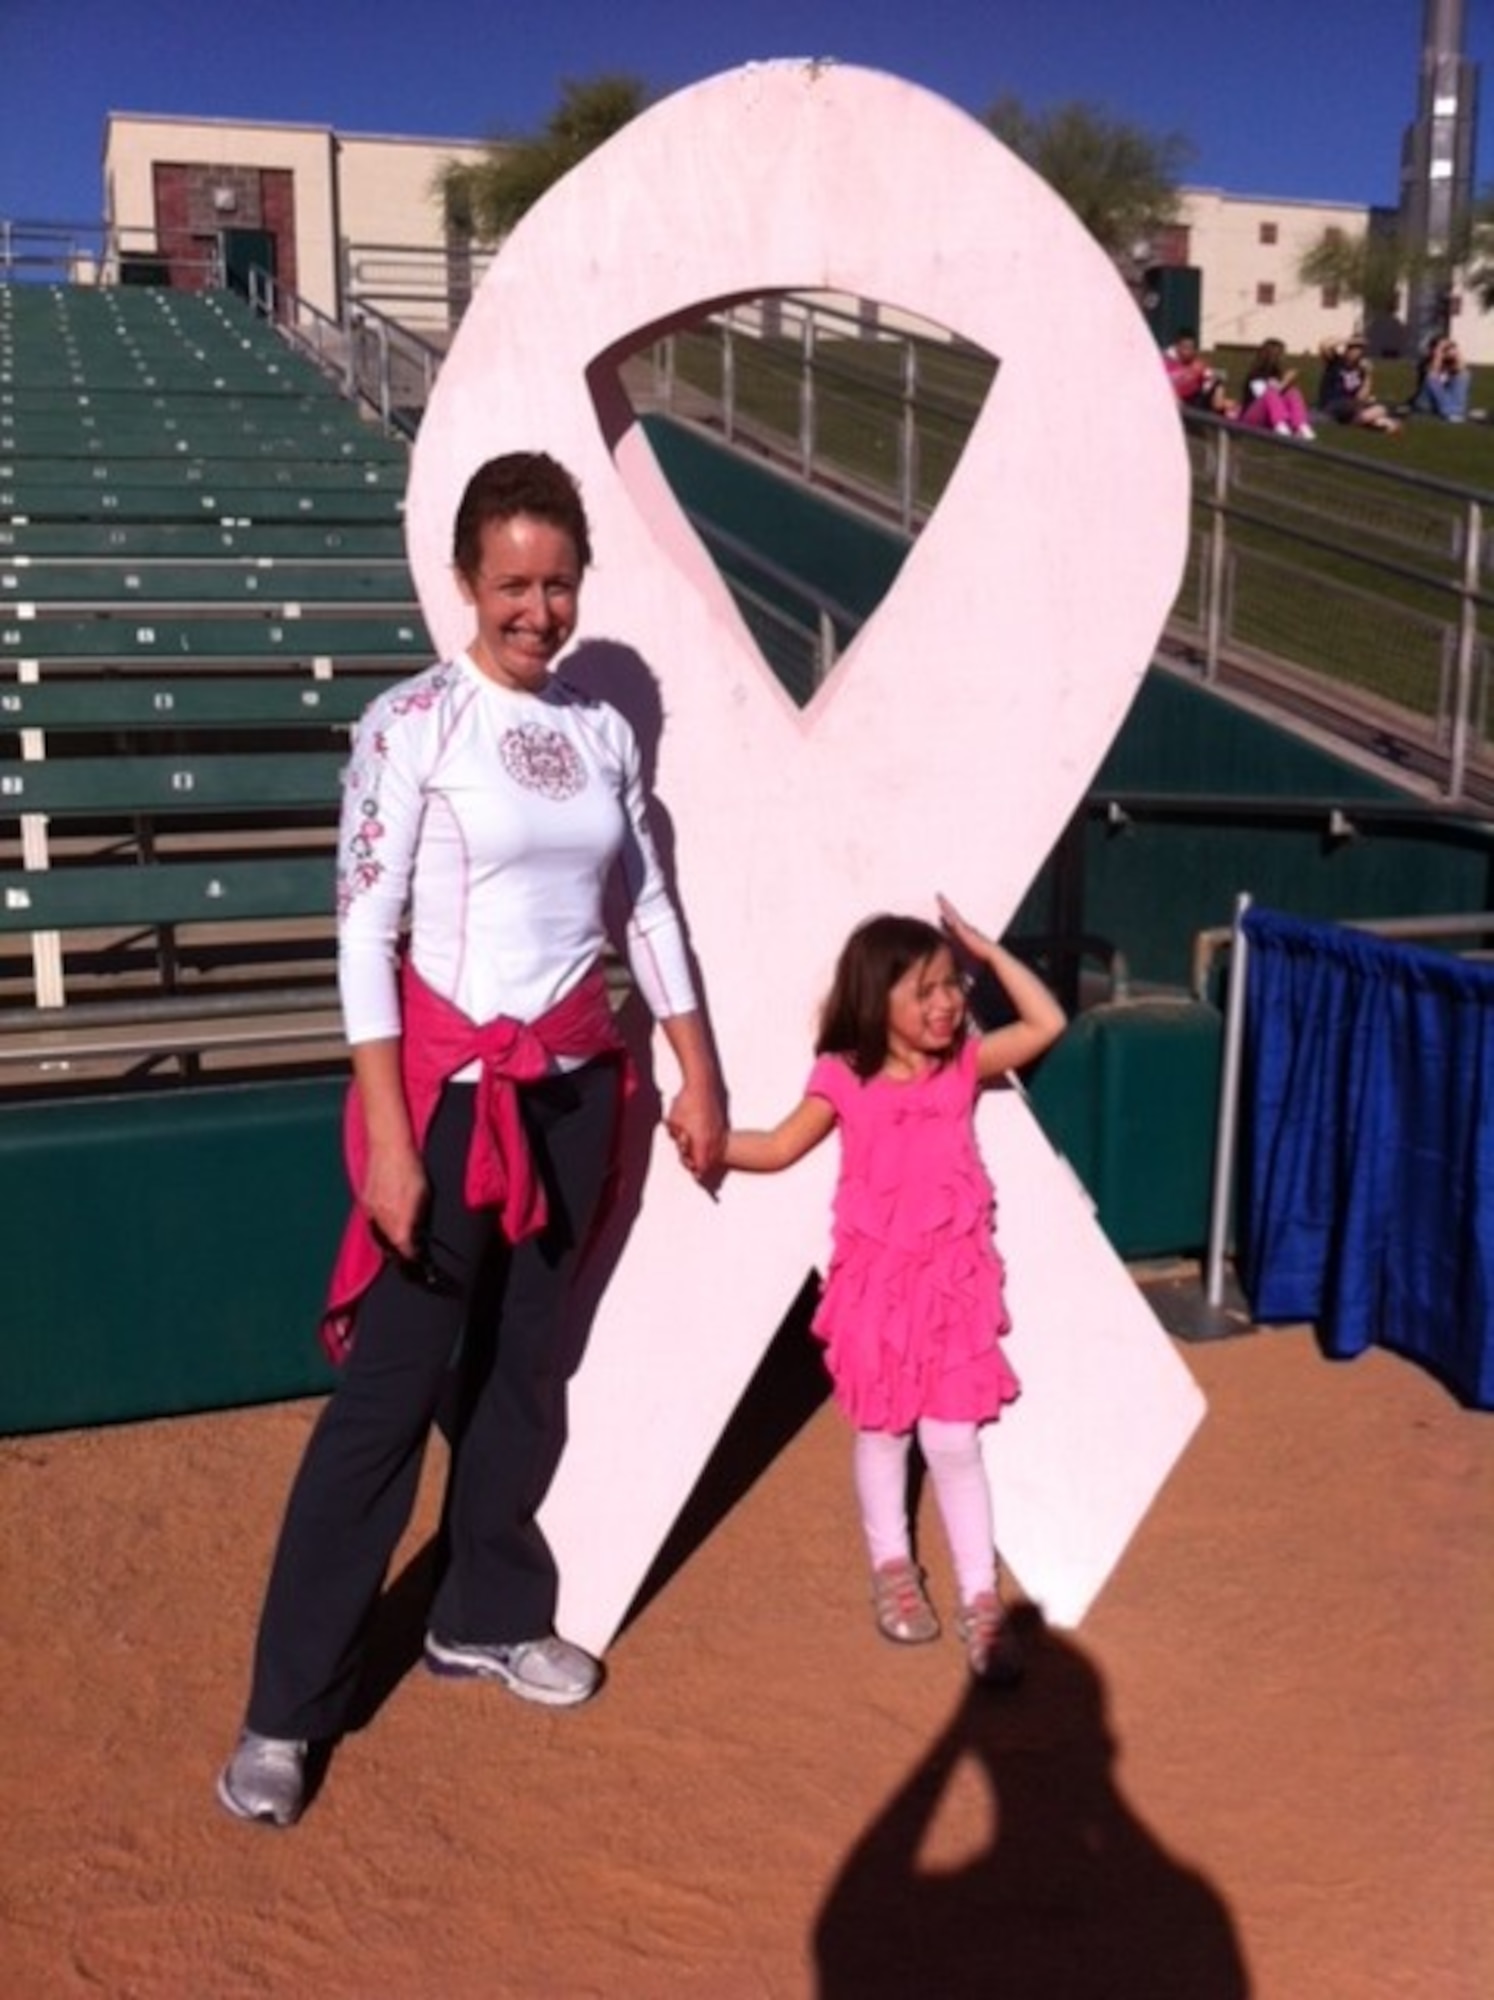 Col. Theresa Medina, 319th Medical Group commander, and her daughter Sophia, pose for a photo Oct. 28, 2012. Medina was diagnosed with stage one breast cancer in 2011, and, with the help of Tricare and the support of her family and friends, she overcame the illness and is now cancer free. (Courtesy photo)